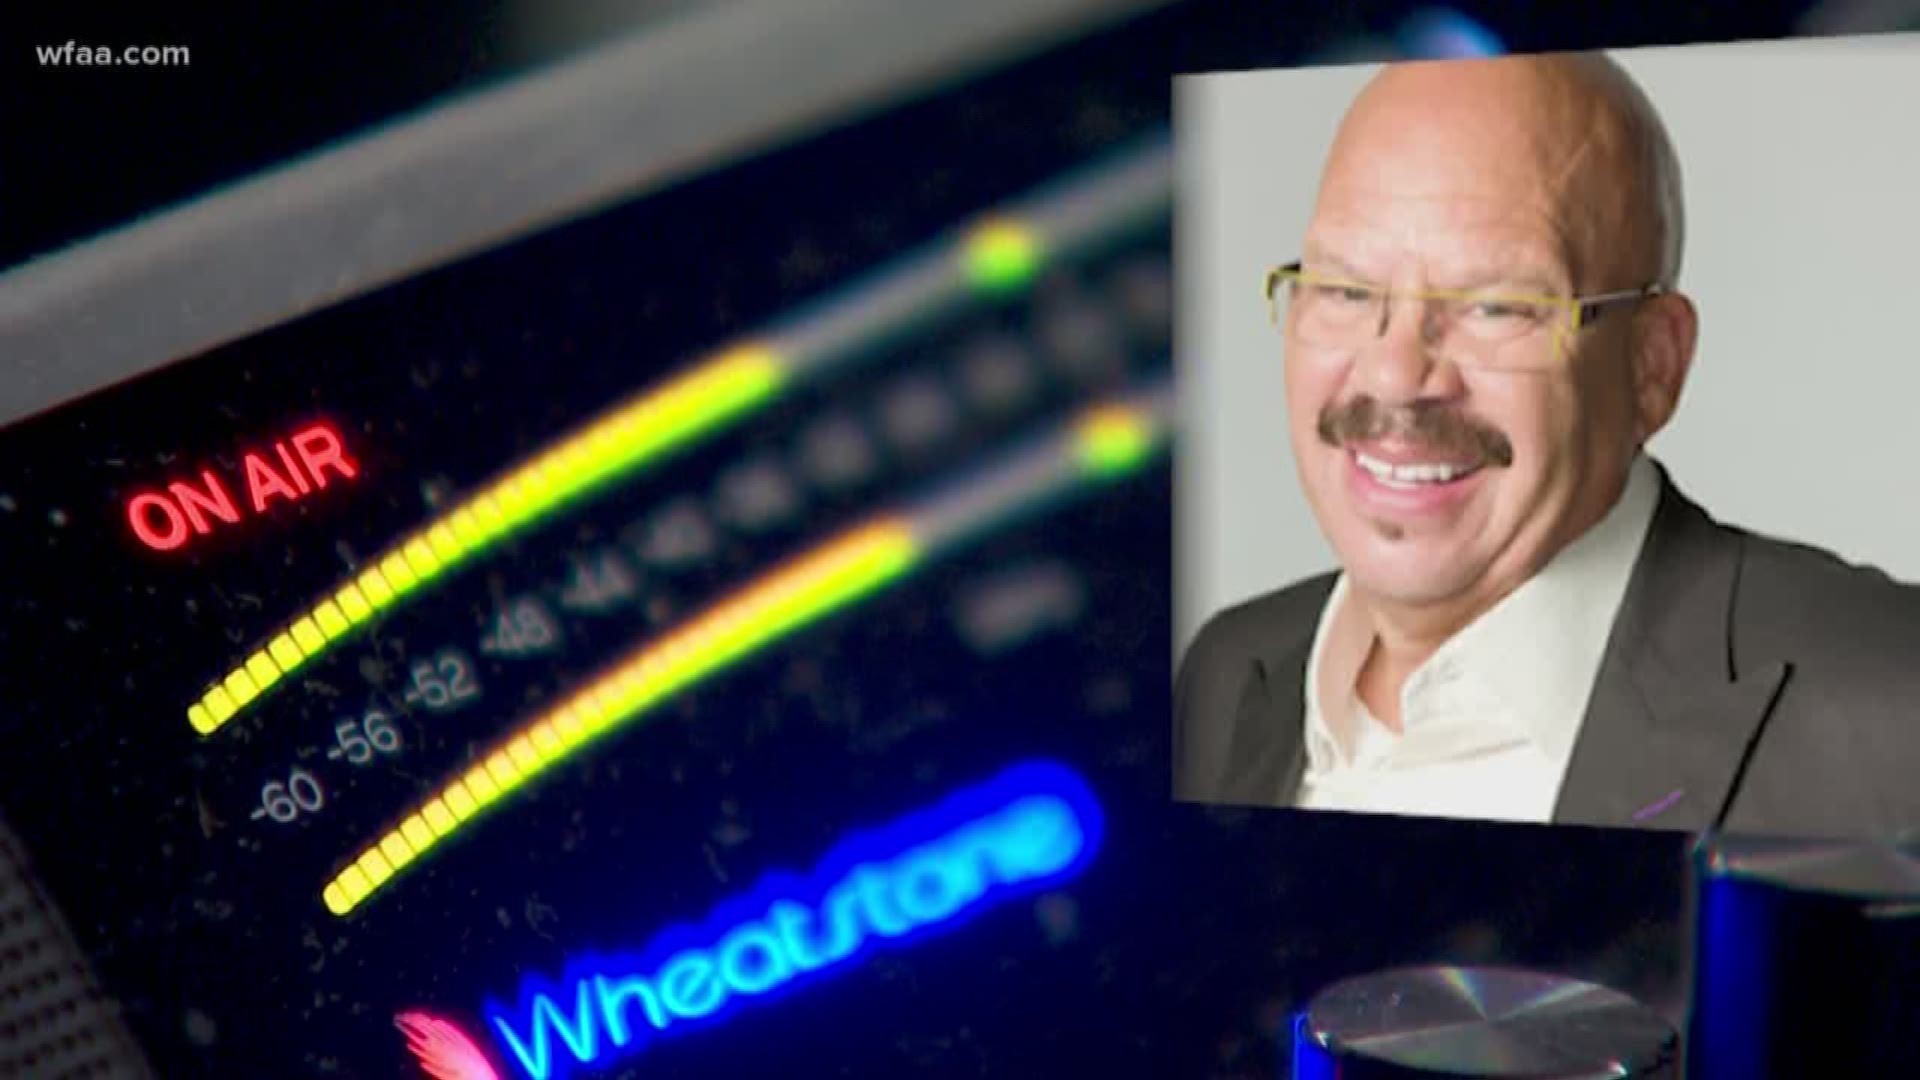 Tom Joyner officially retired Friday. He inspired thousands through his work in entertainment but also in his community service.